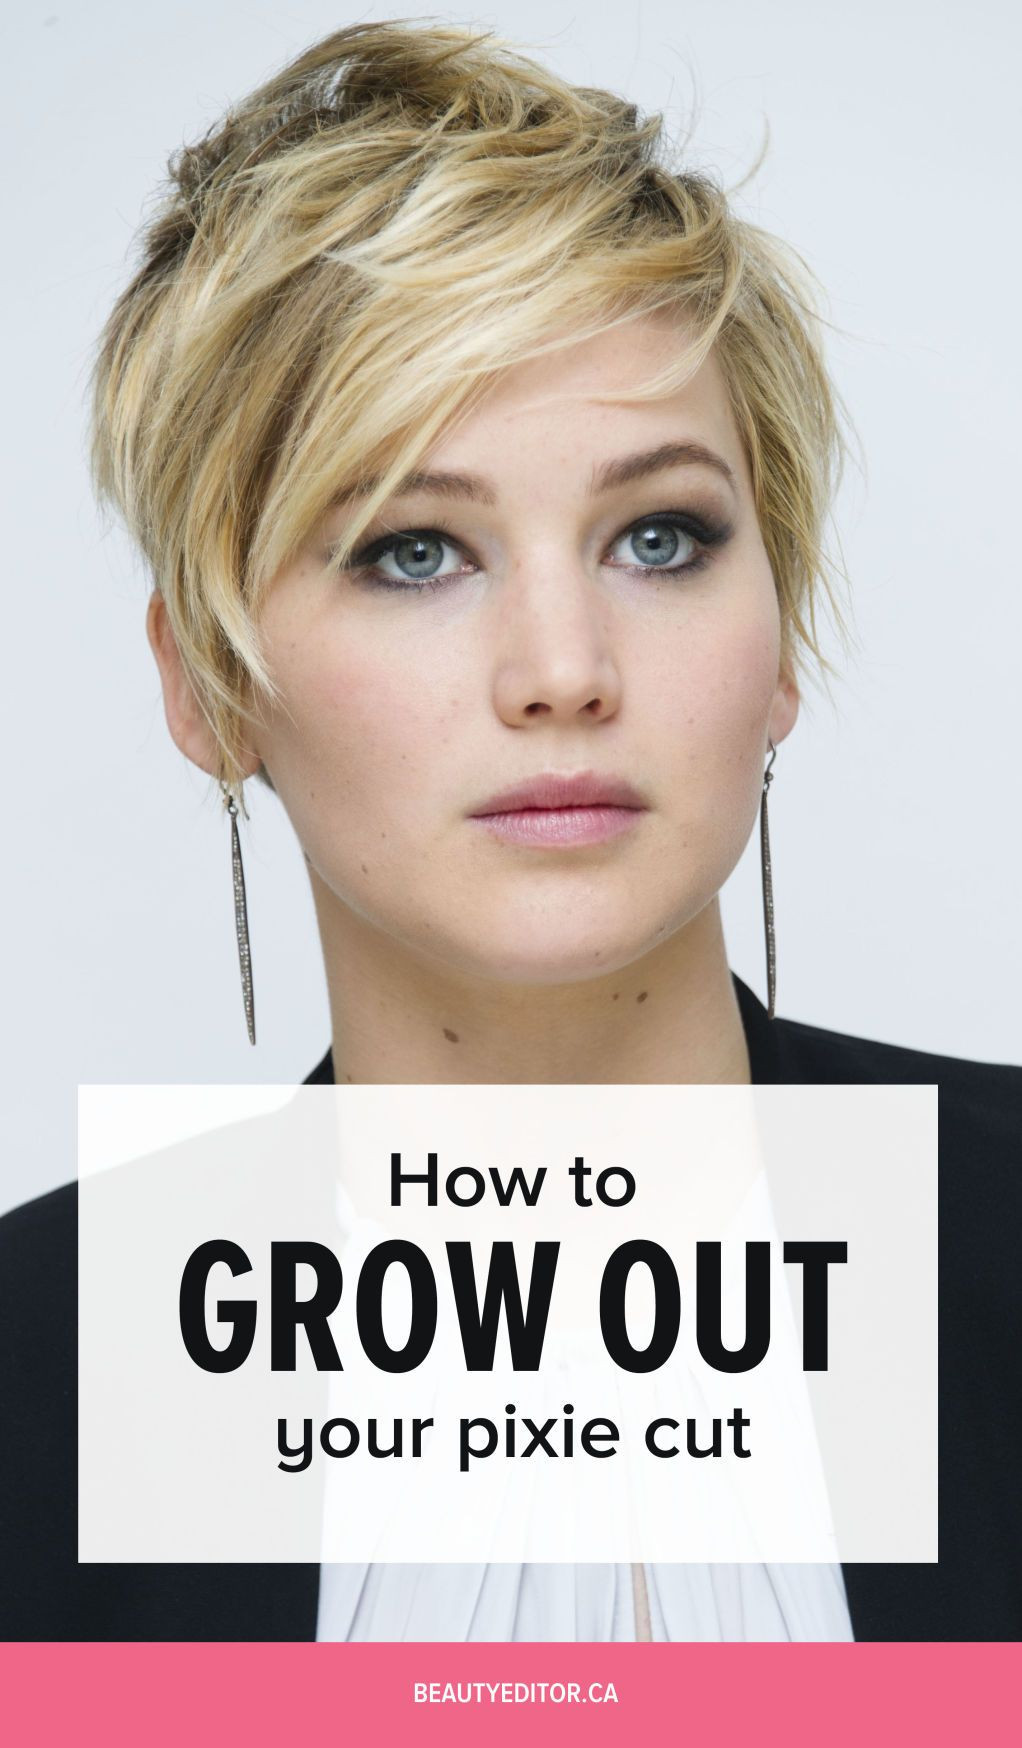 Hairstyles For Growing Out Undercut
 Ask a Hairstylist How to Grow Out Your Hair After a Pixie